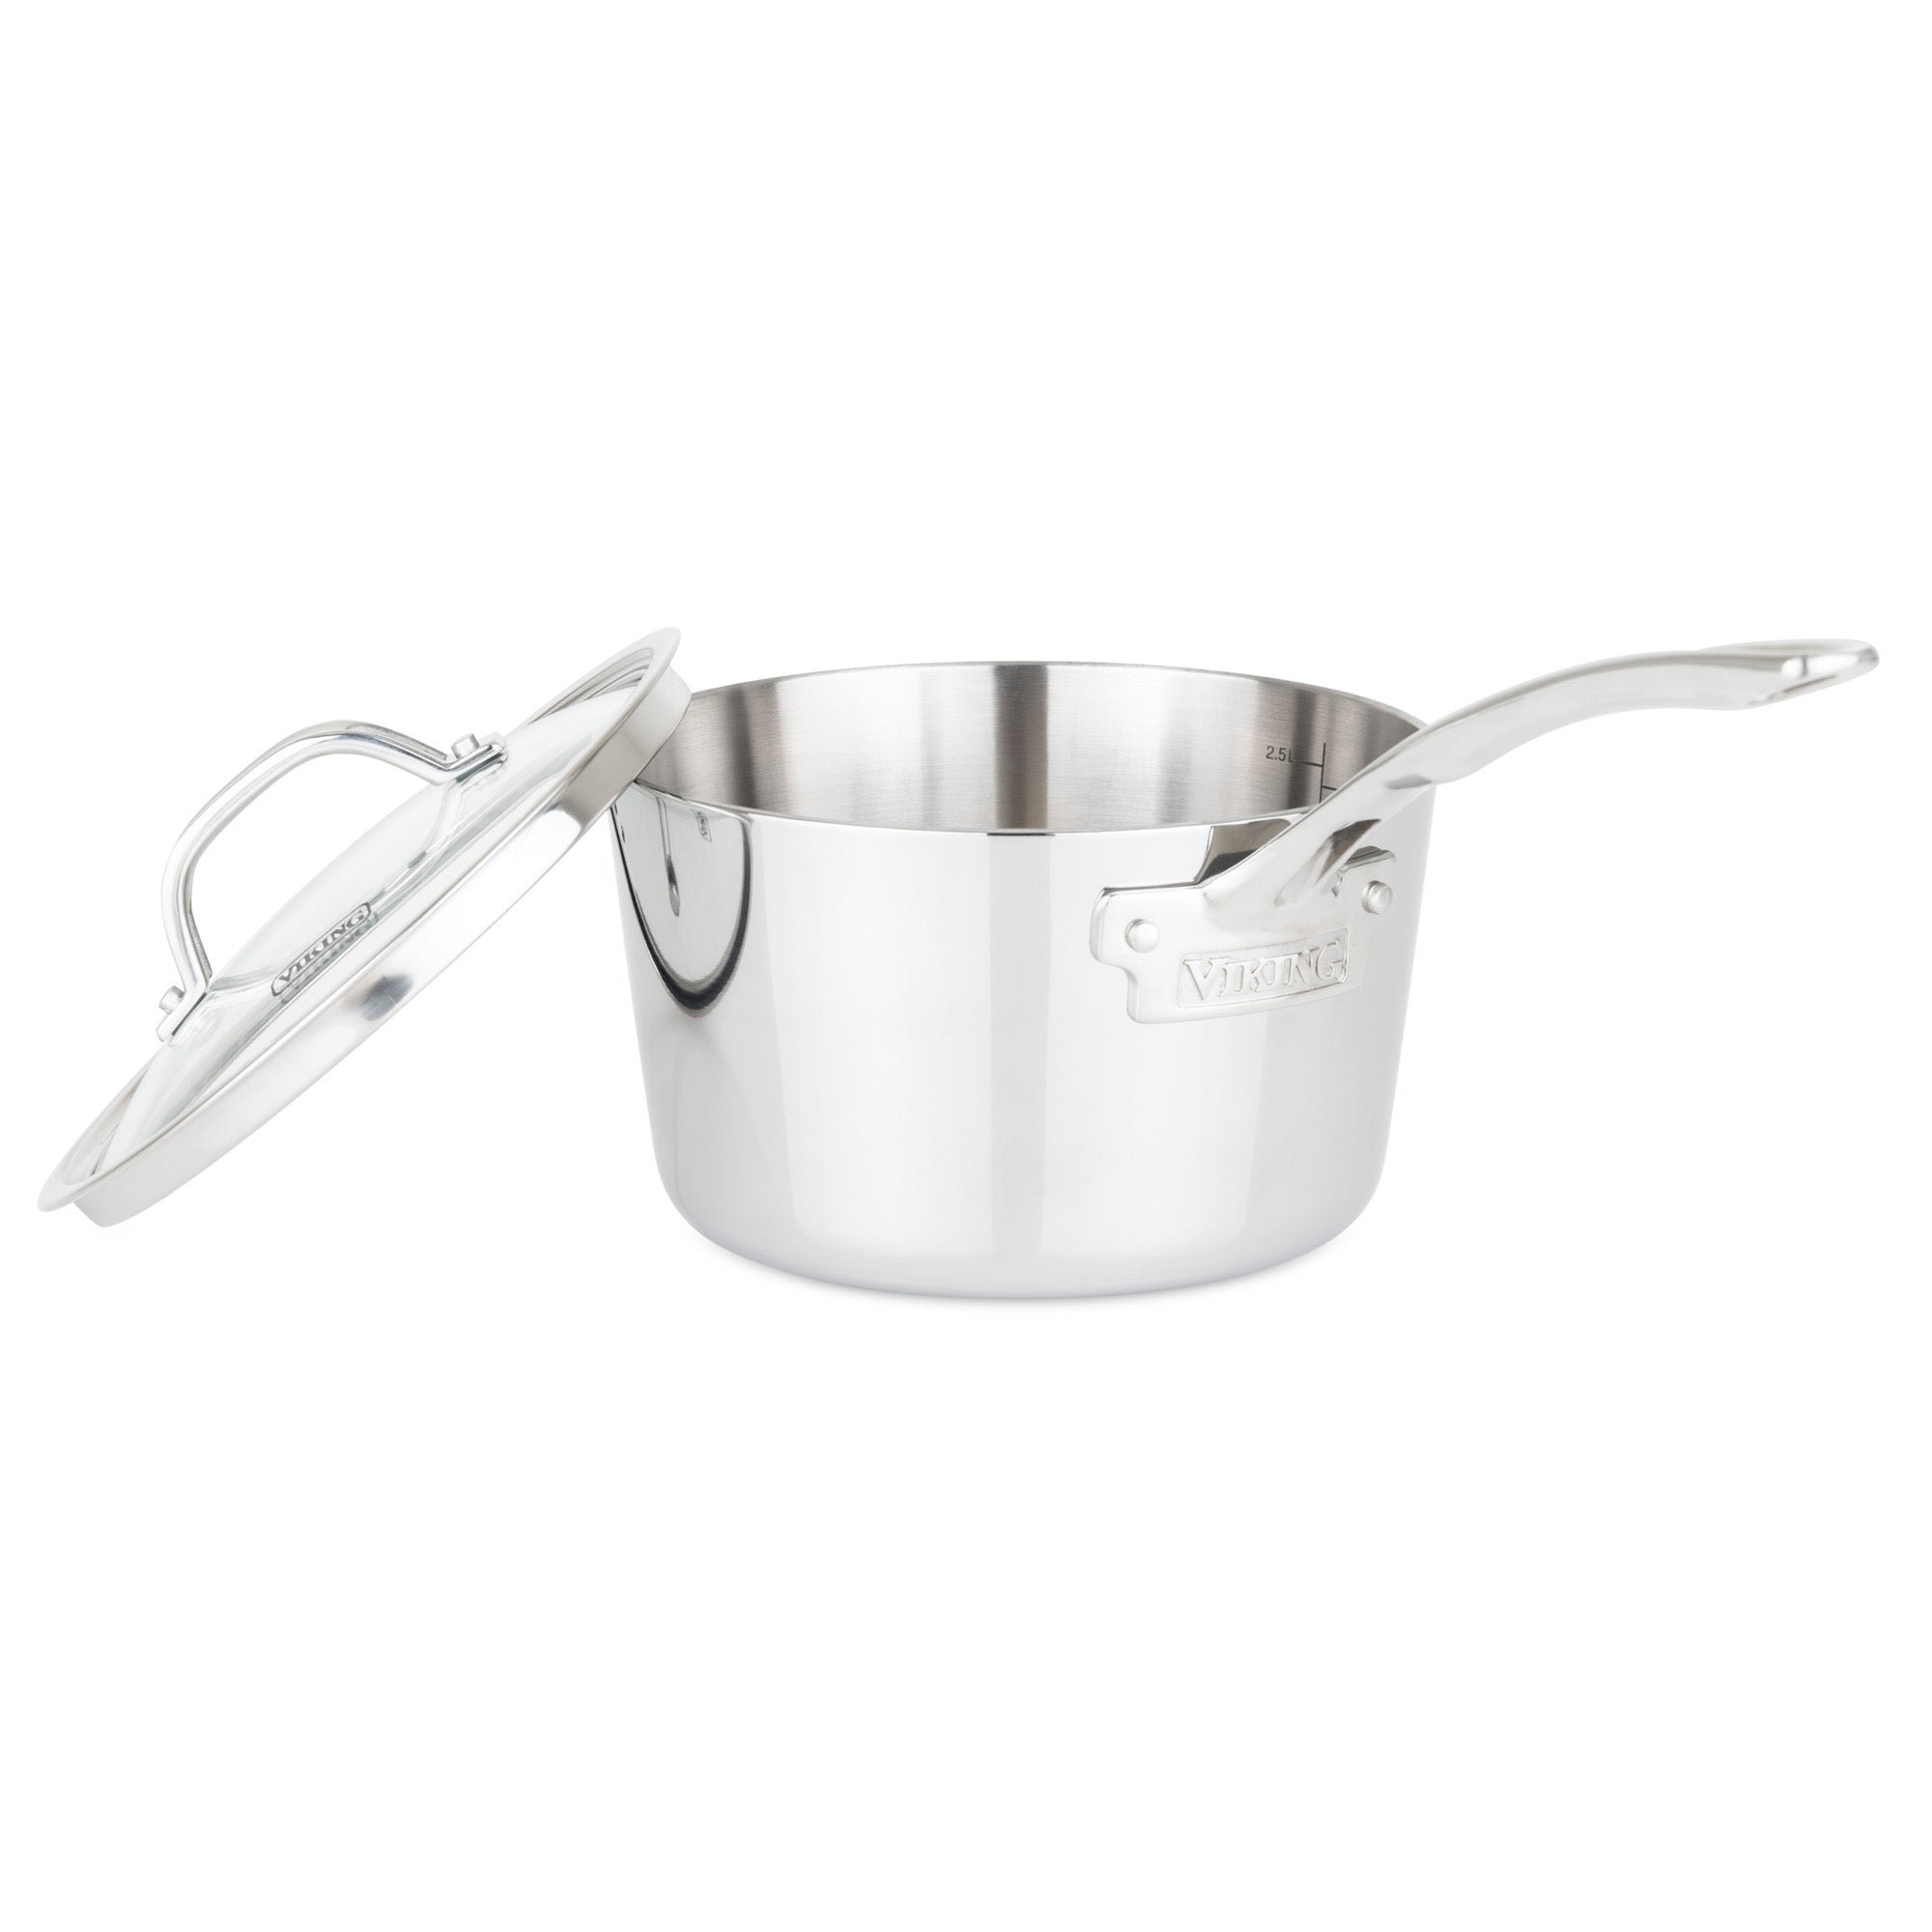 Stainless Steel Saucepan With Lid